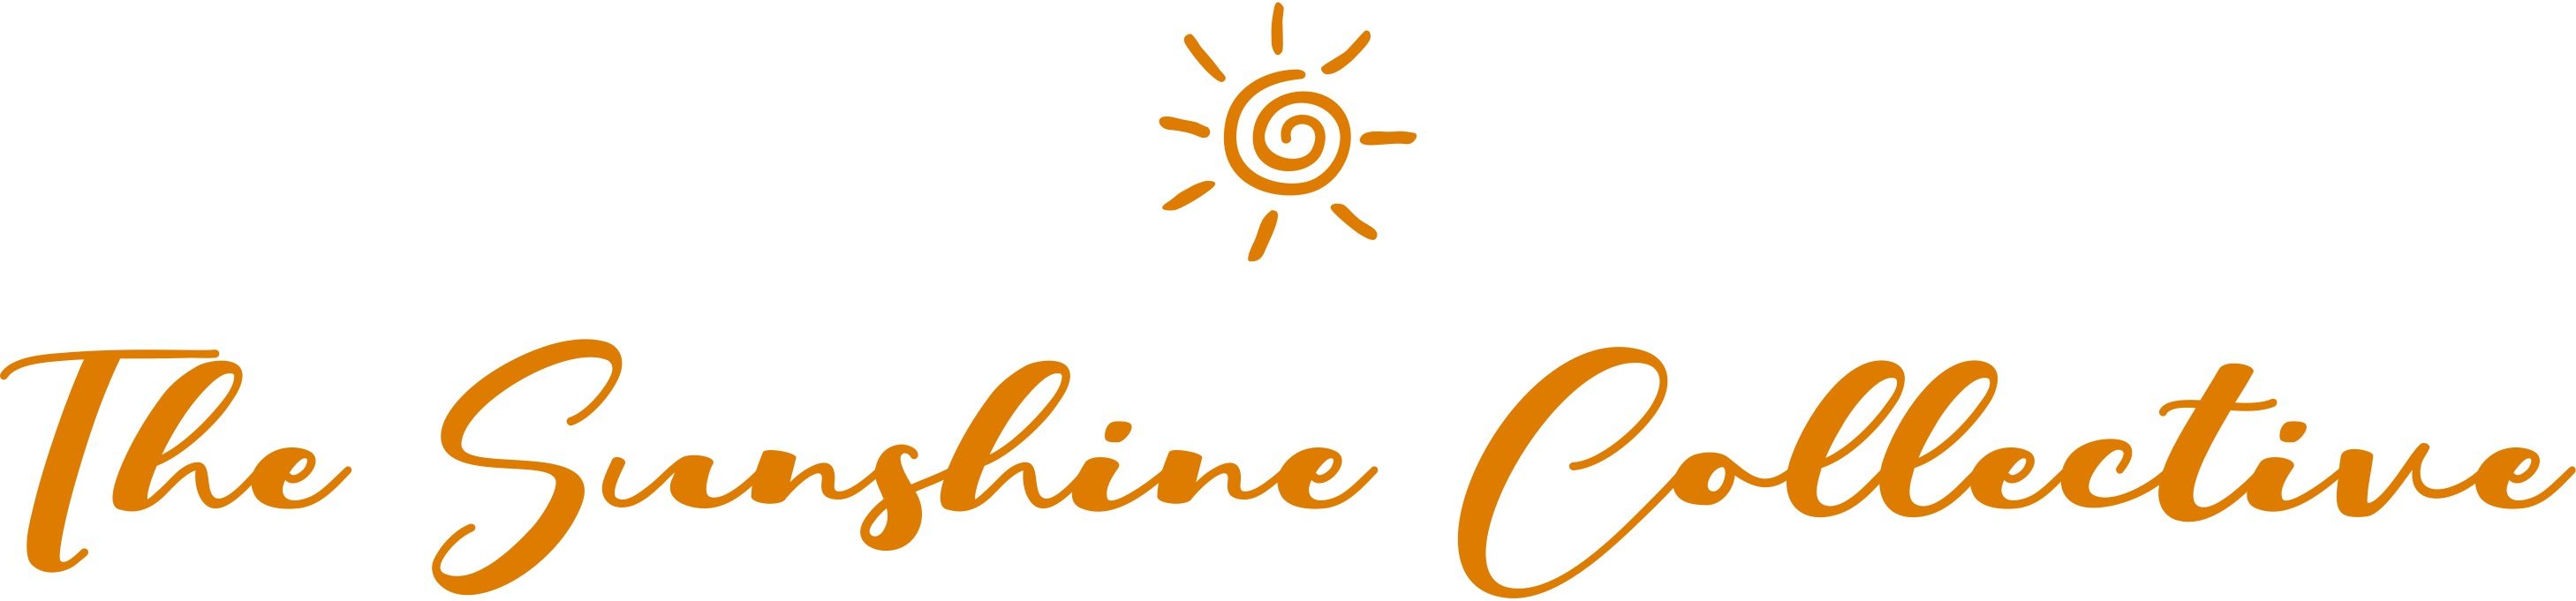 The Sunshine Collective business logo